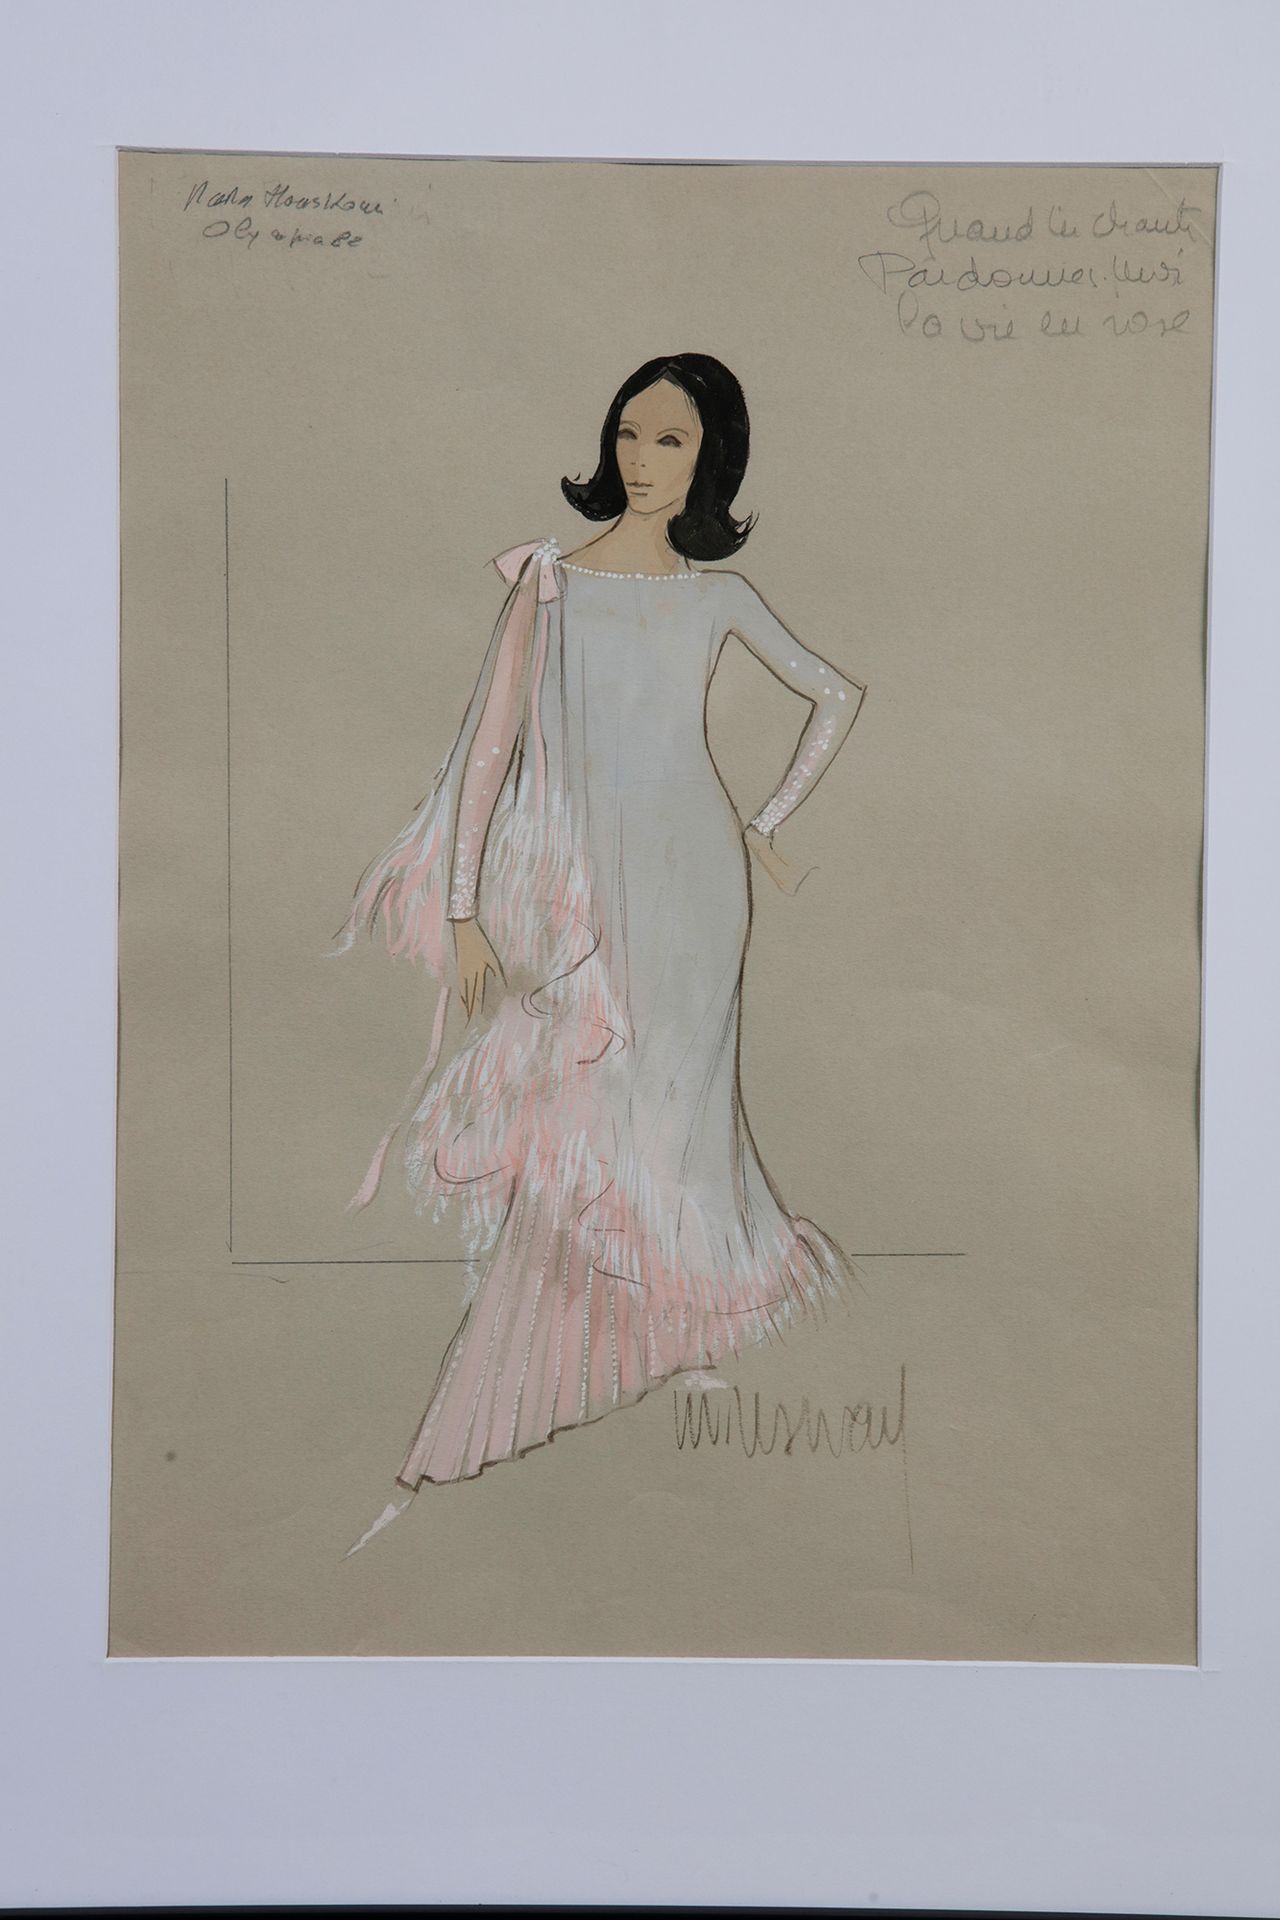 Null NANA MOUSKOURI
2 original drawings of 2 outfits created by the stylist Mich&hellip;